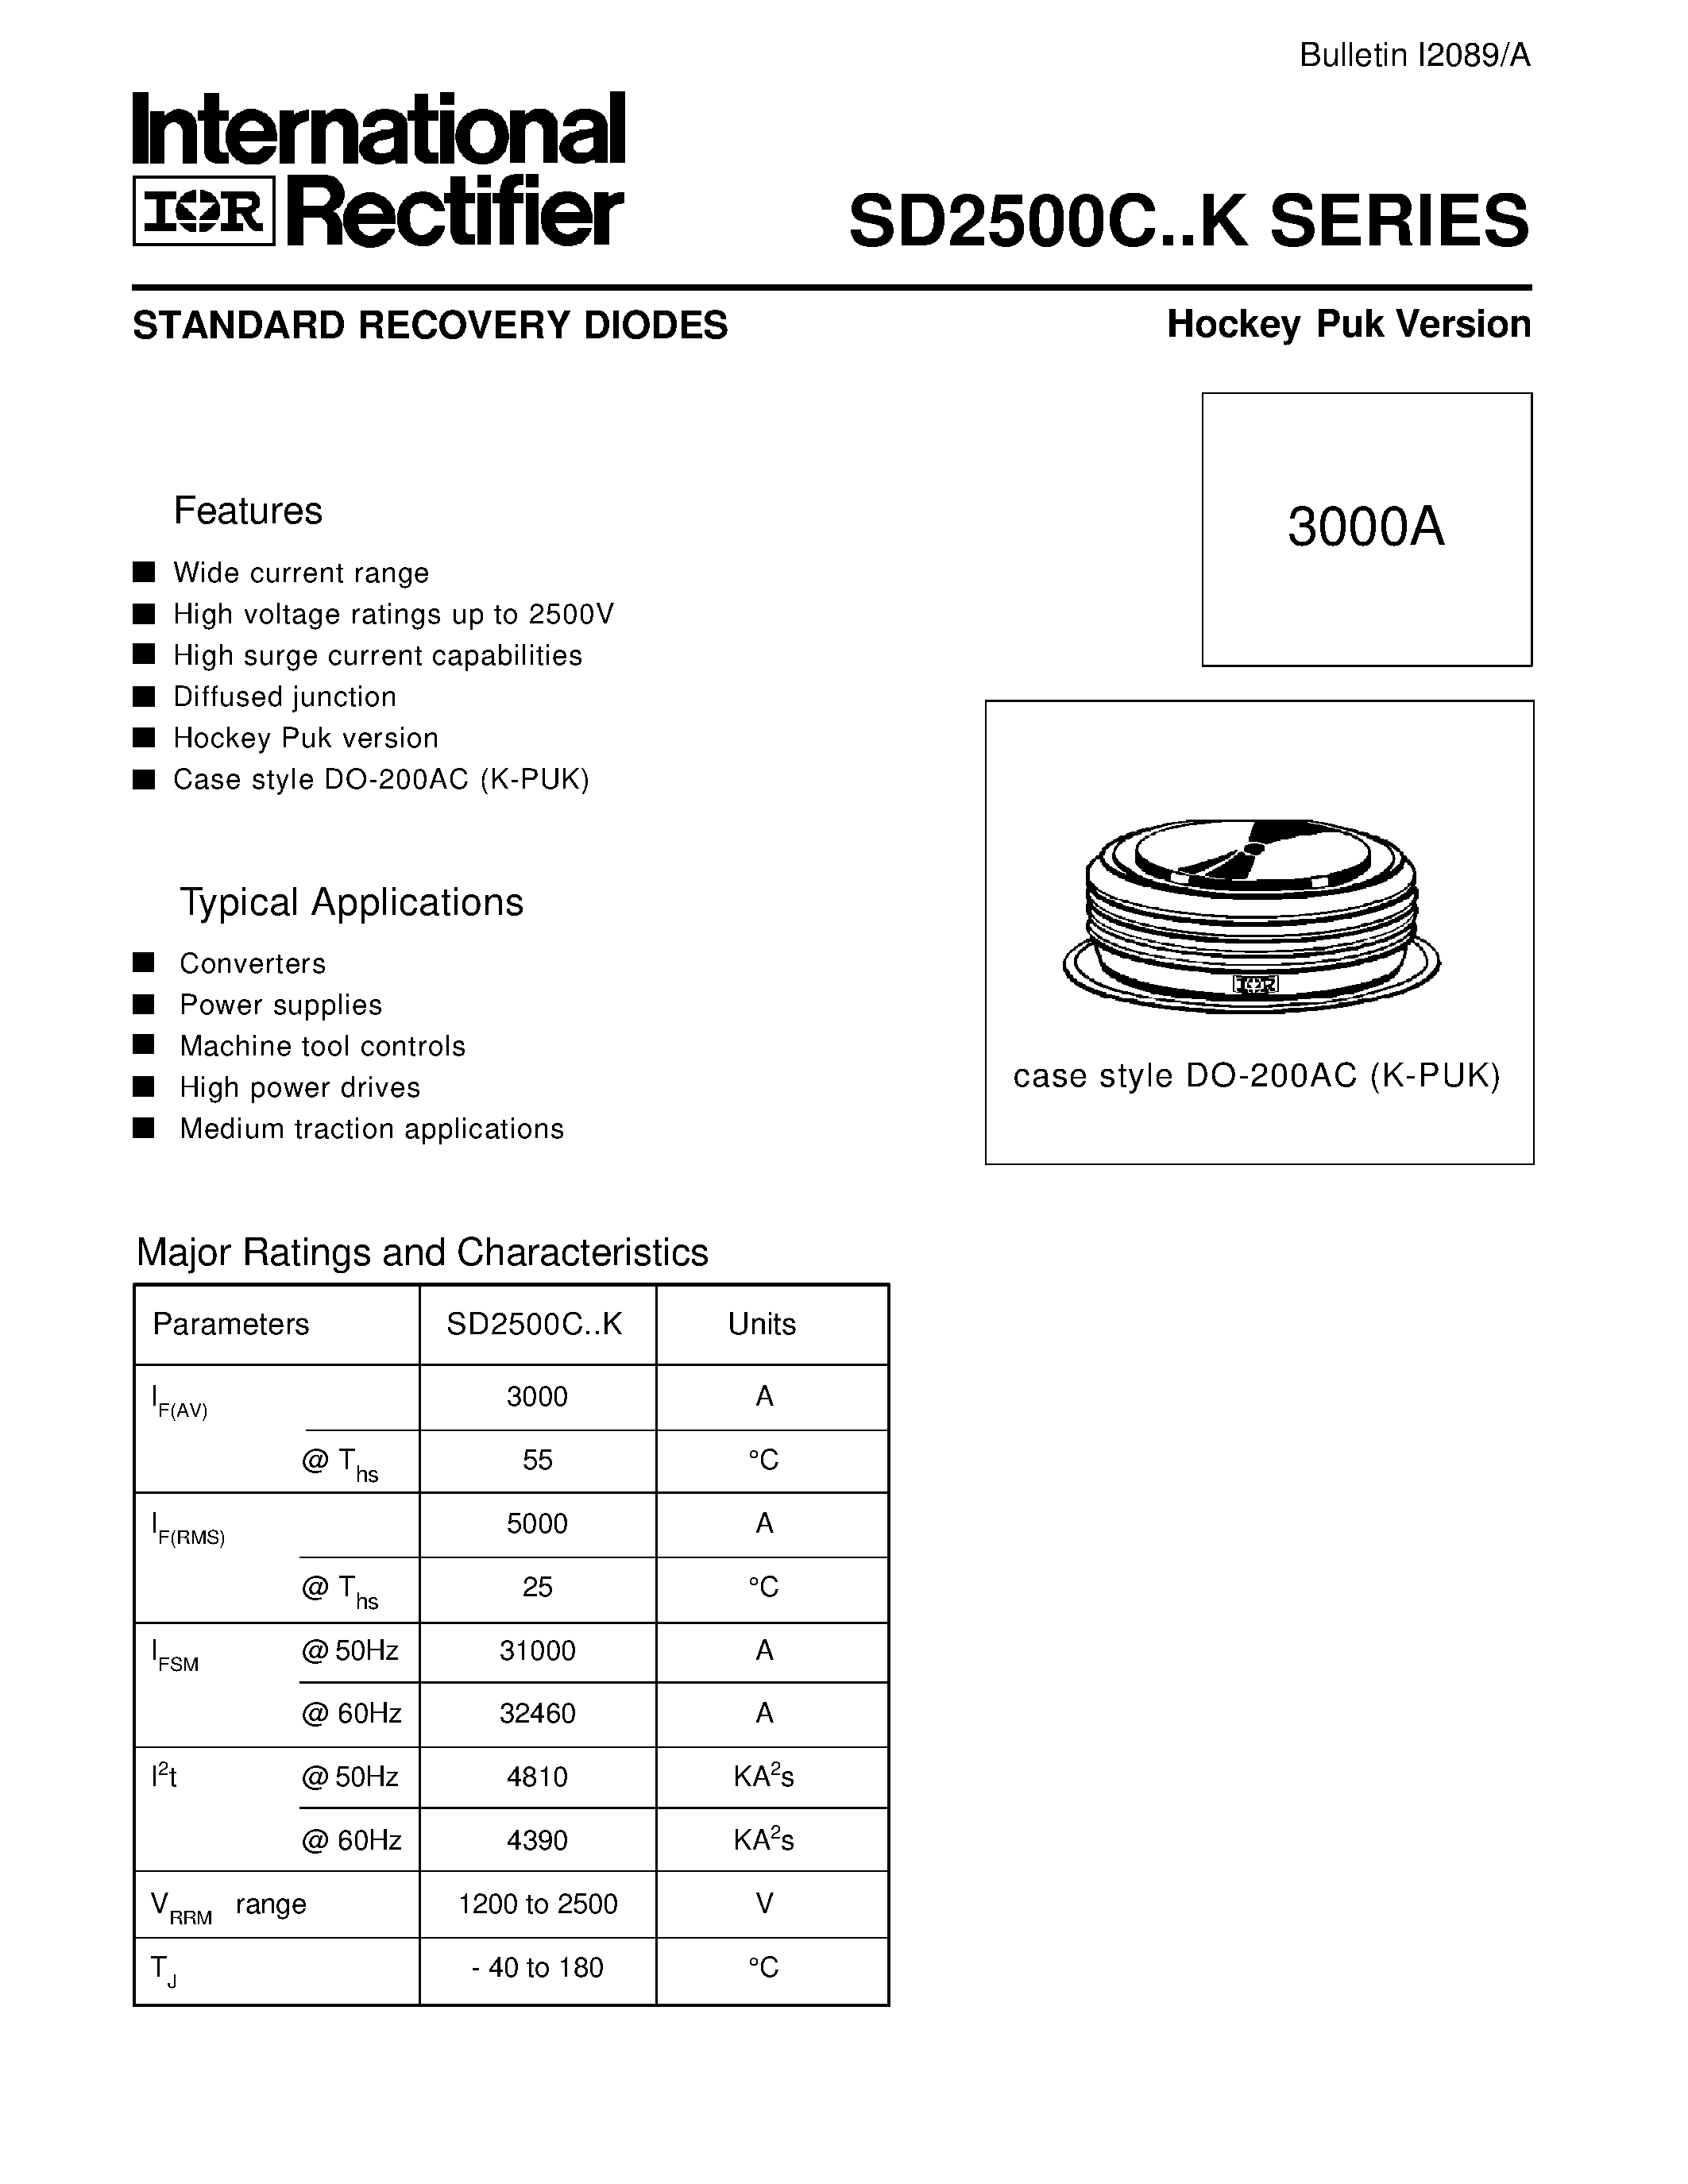 Даташит SD2500C - STANDARD RECOVERY DIODES Hockey Puk Version страница 2